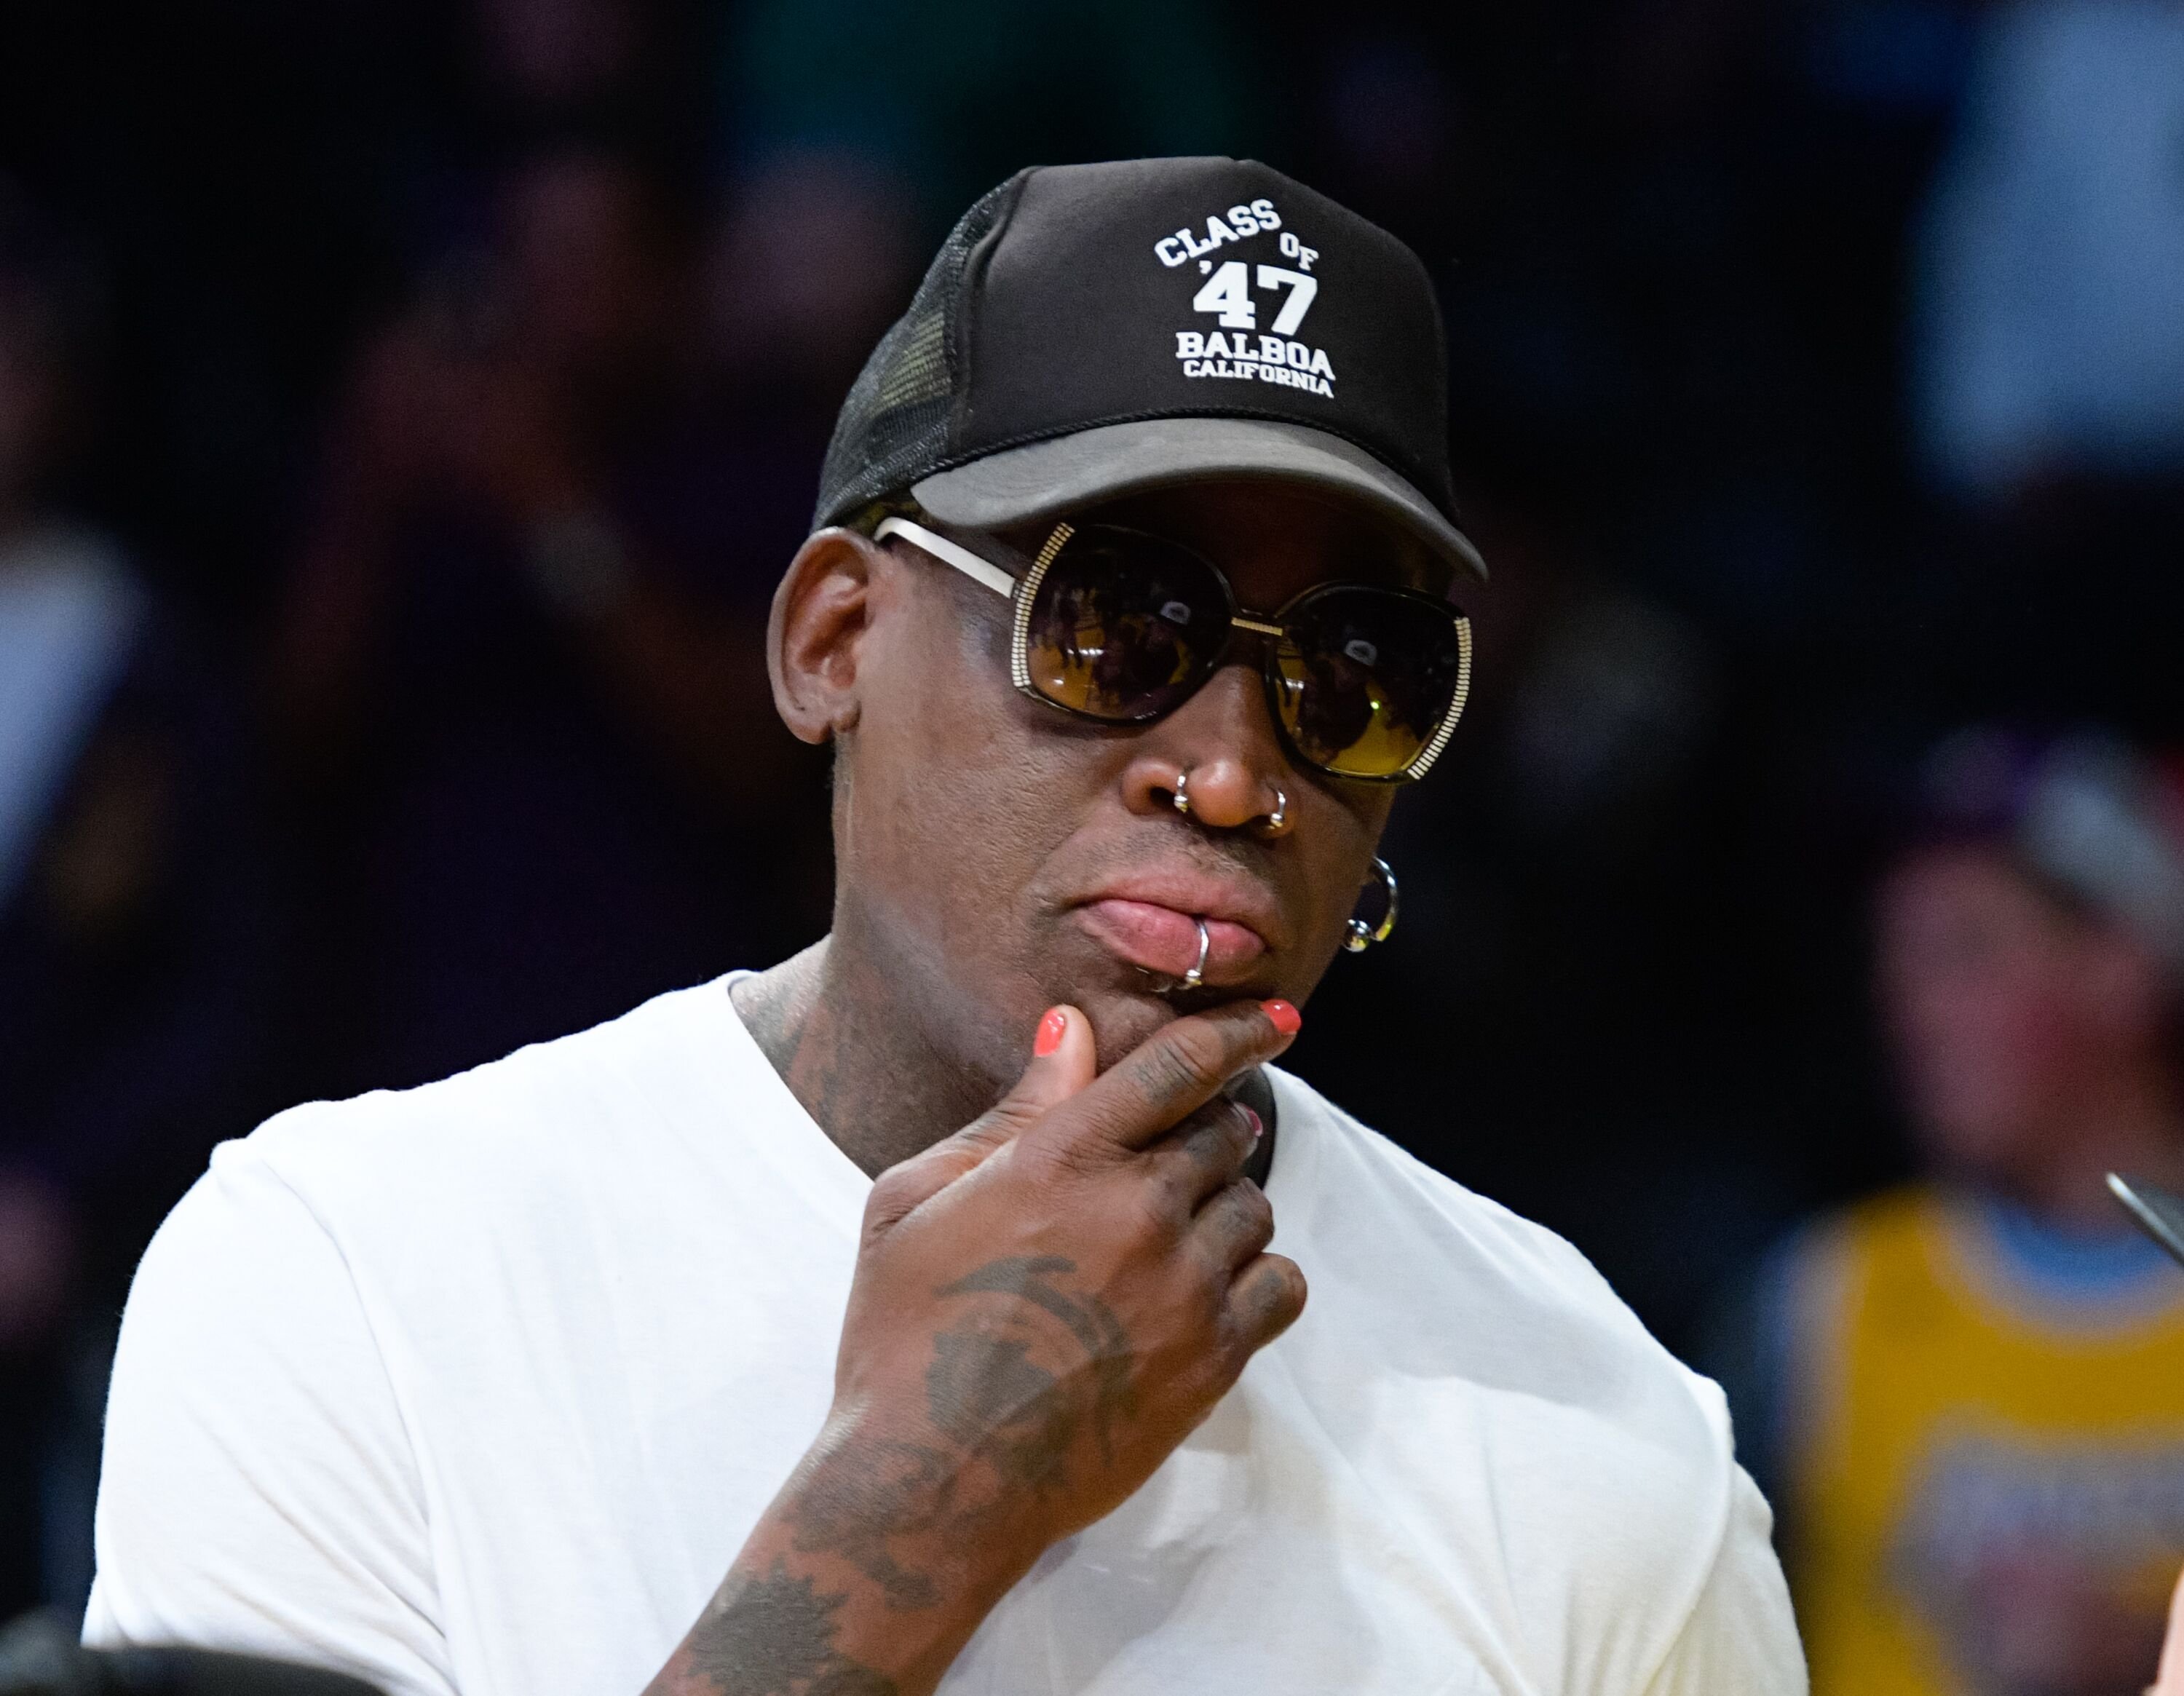 Dennis Rodman attends a basketball game between the Golden State Warriors and the Los Angeles Lakers at Staples Center on November 25, 2016 in Los Angeles, California. | Source: Getty Images